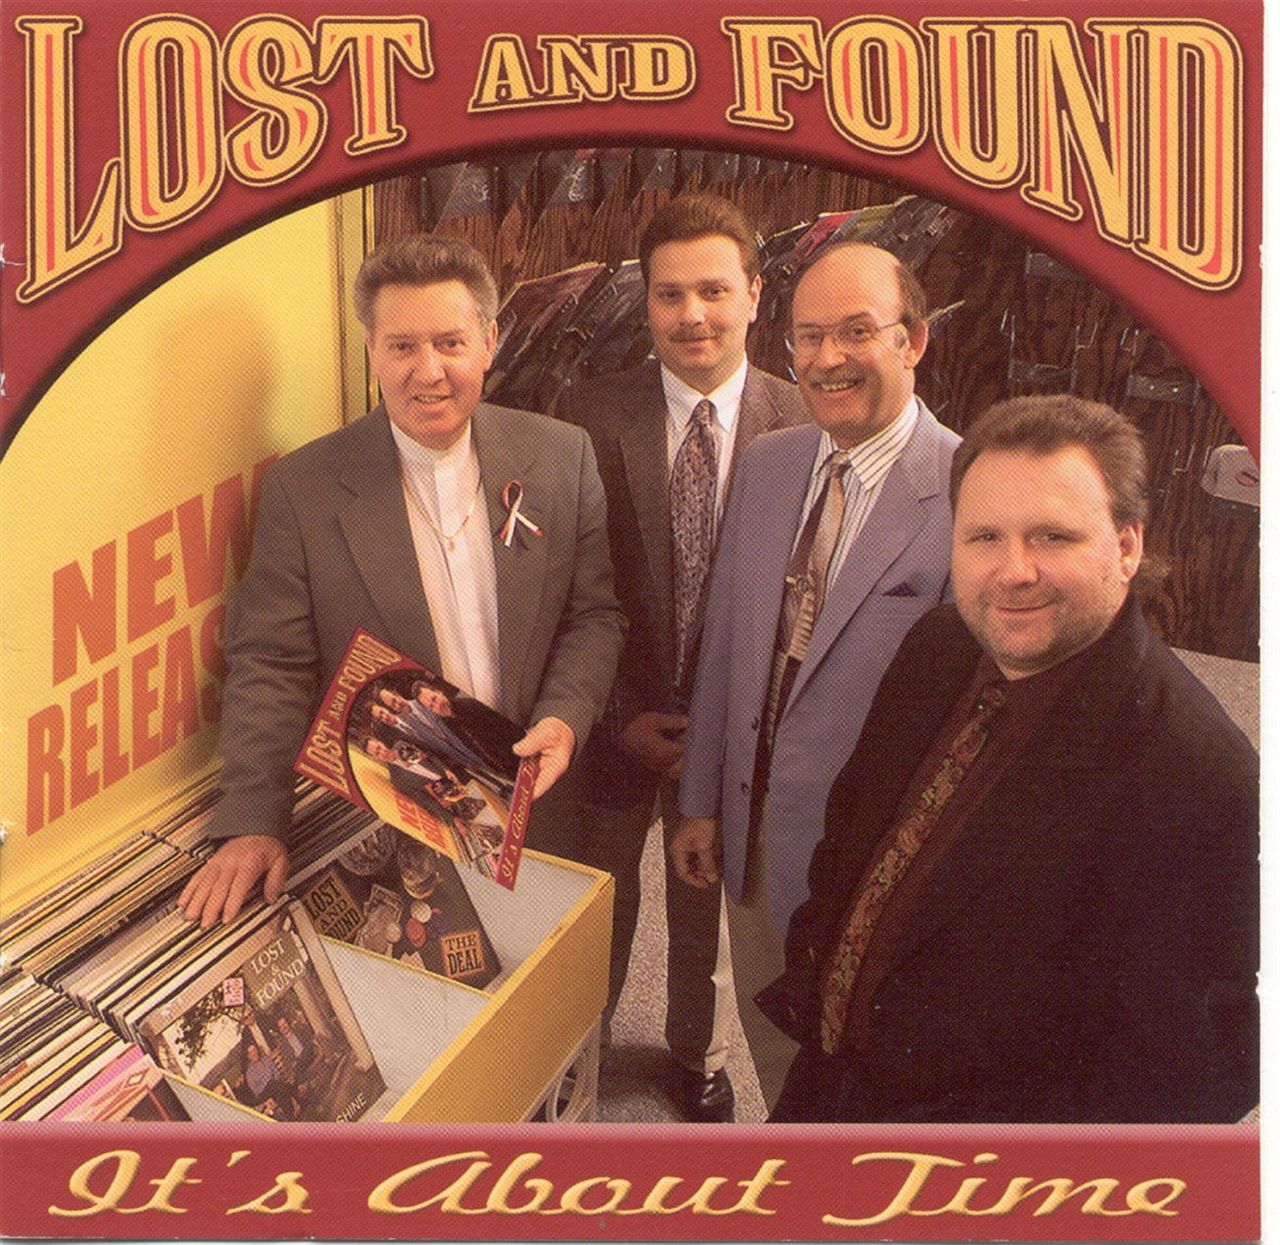 Lost And Found - It’s About Time cover album